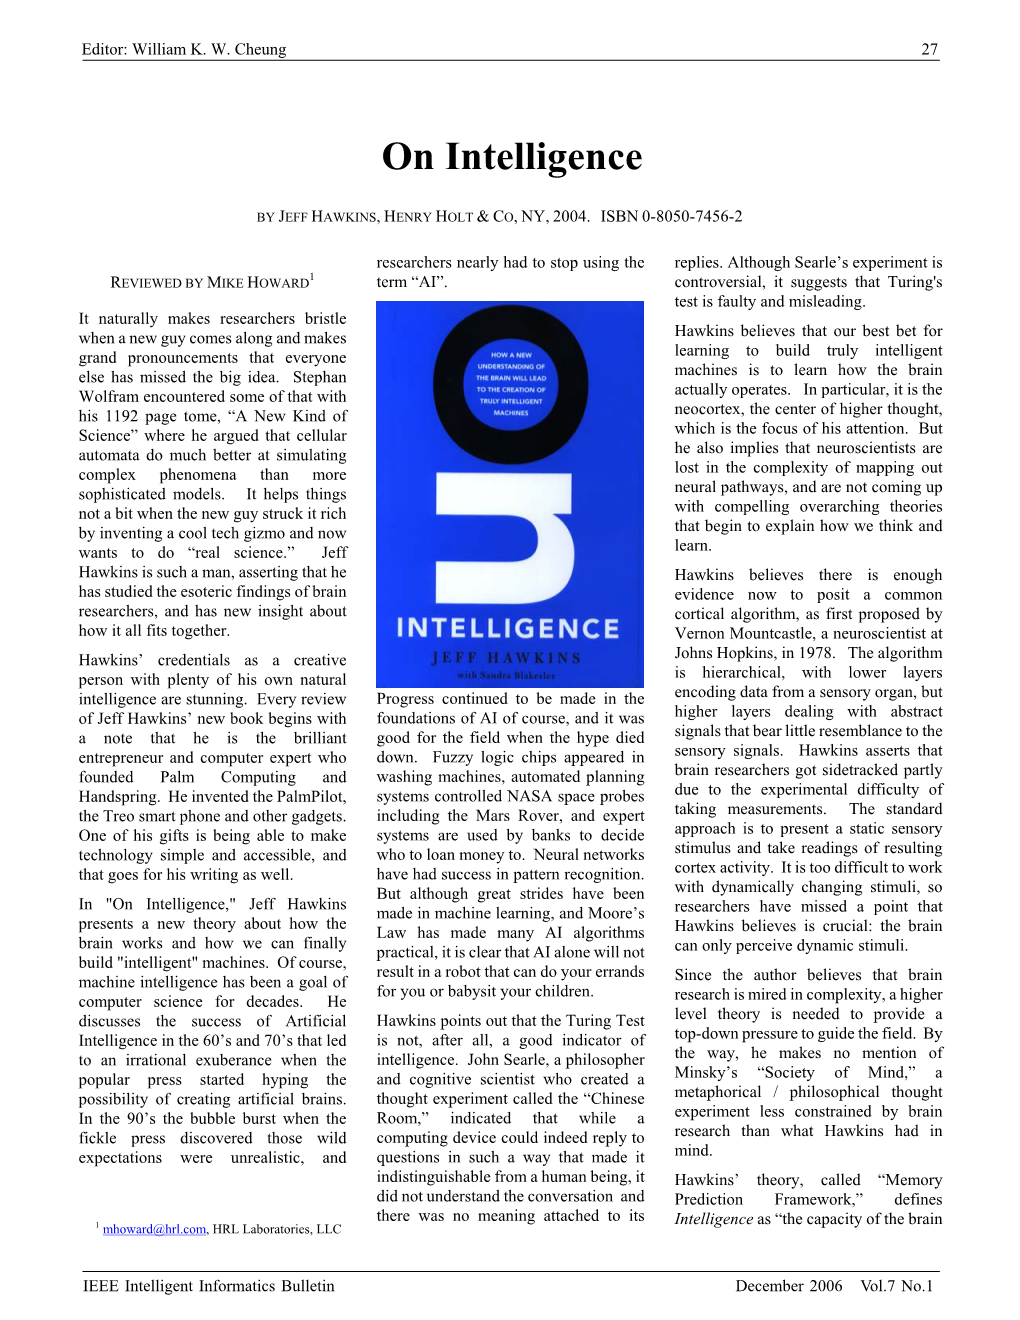 Book Review: on Intelligence